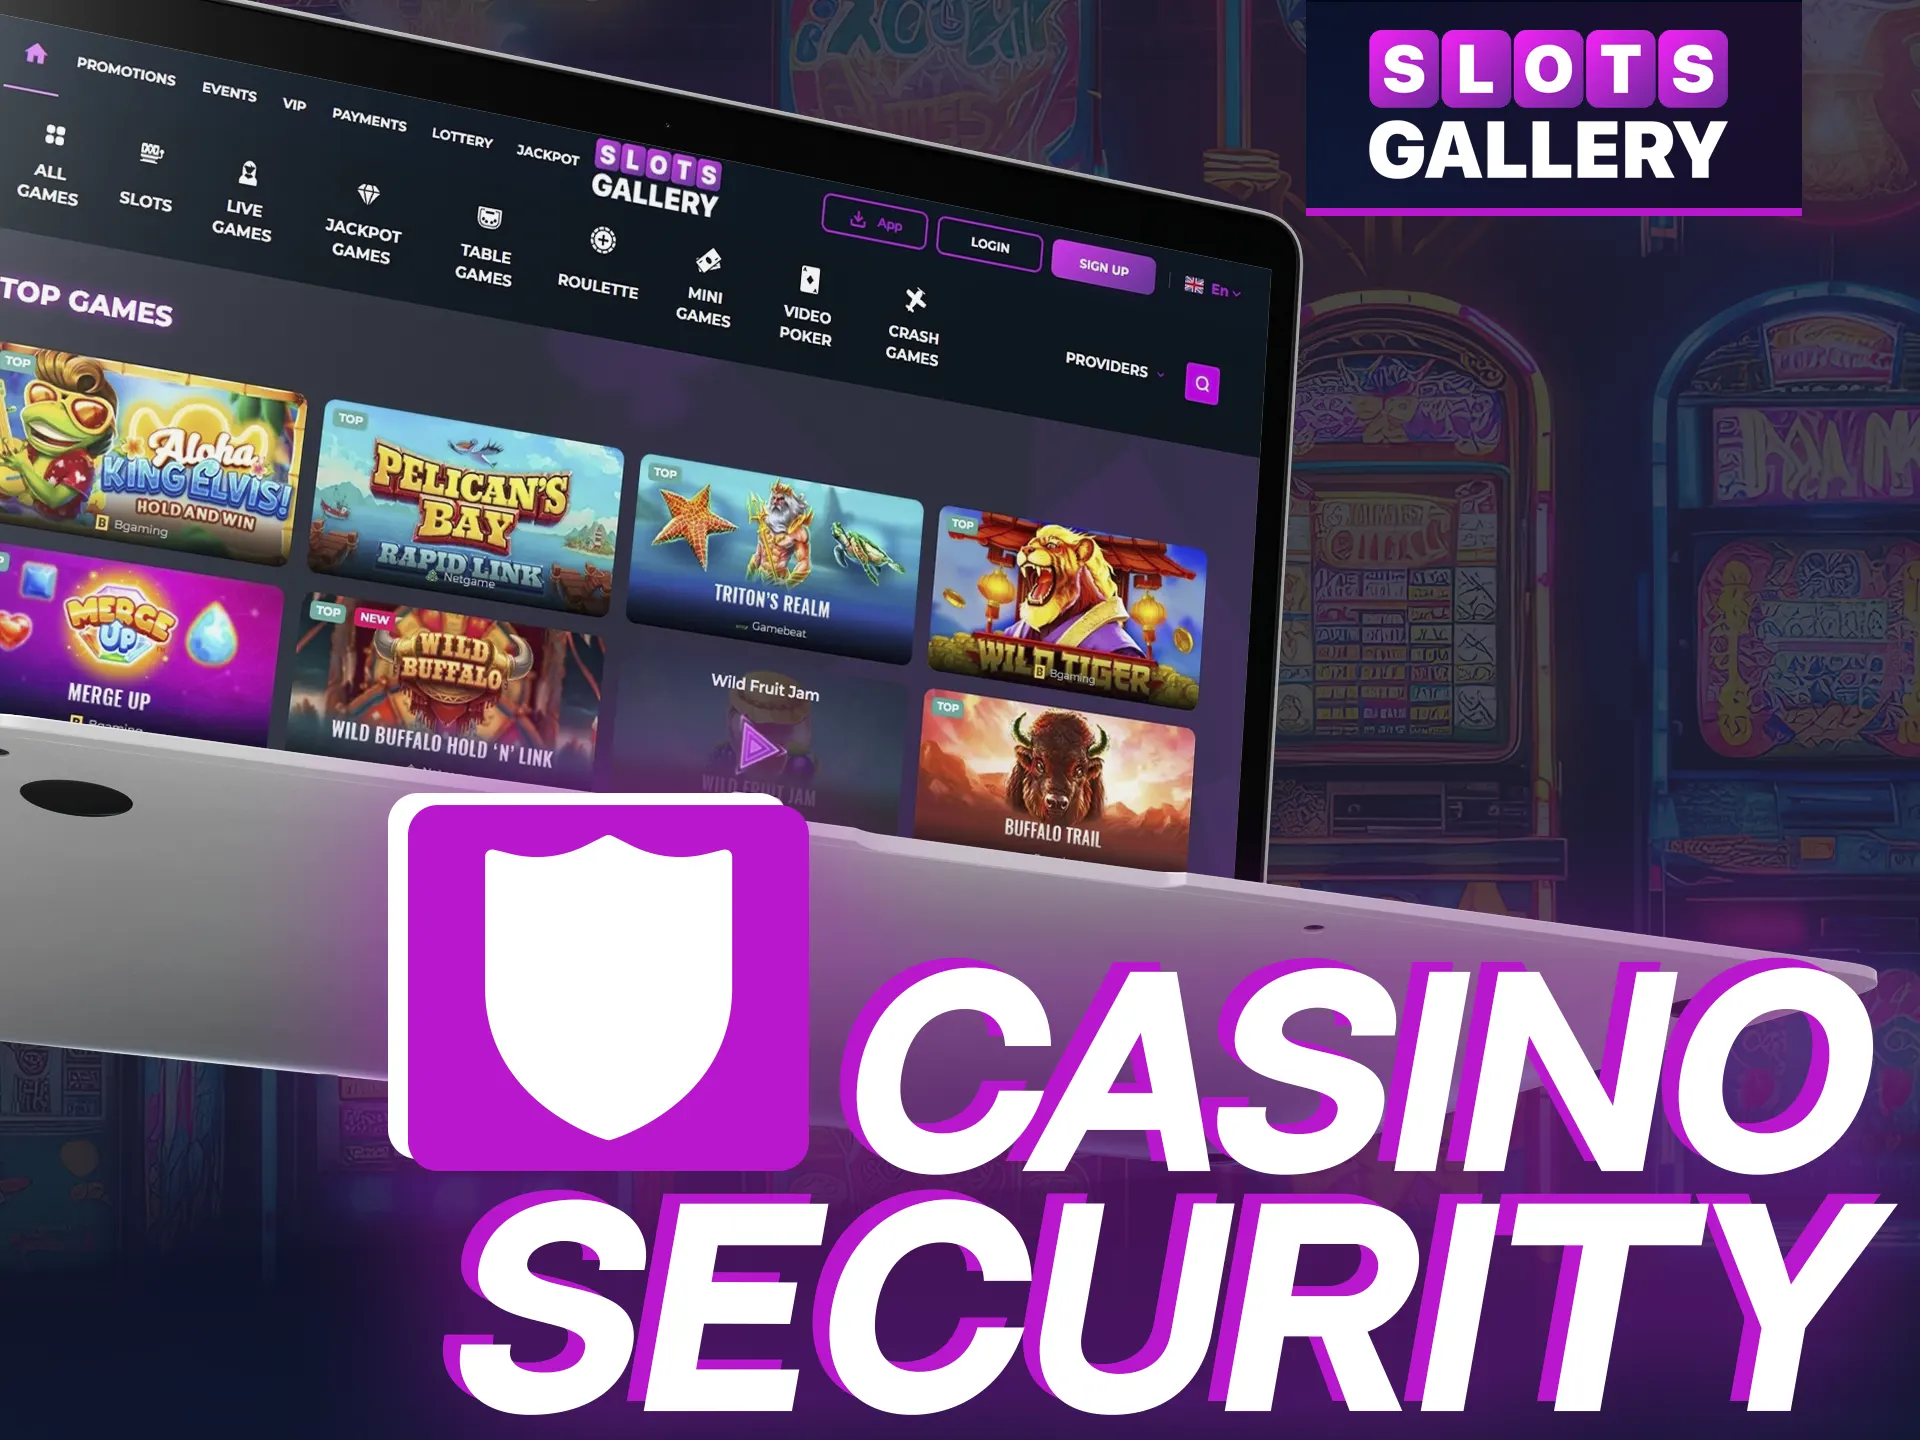 Slots Gallery prioritizes safety for players.